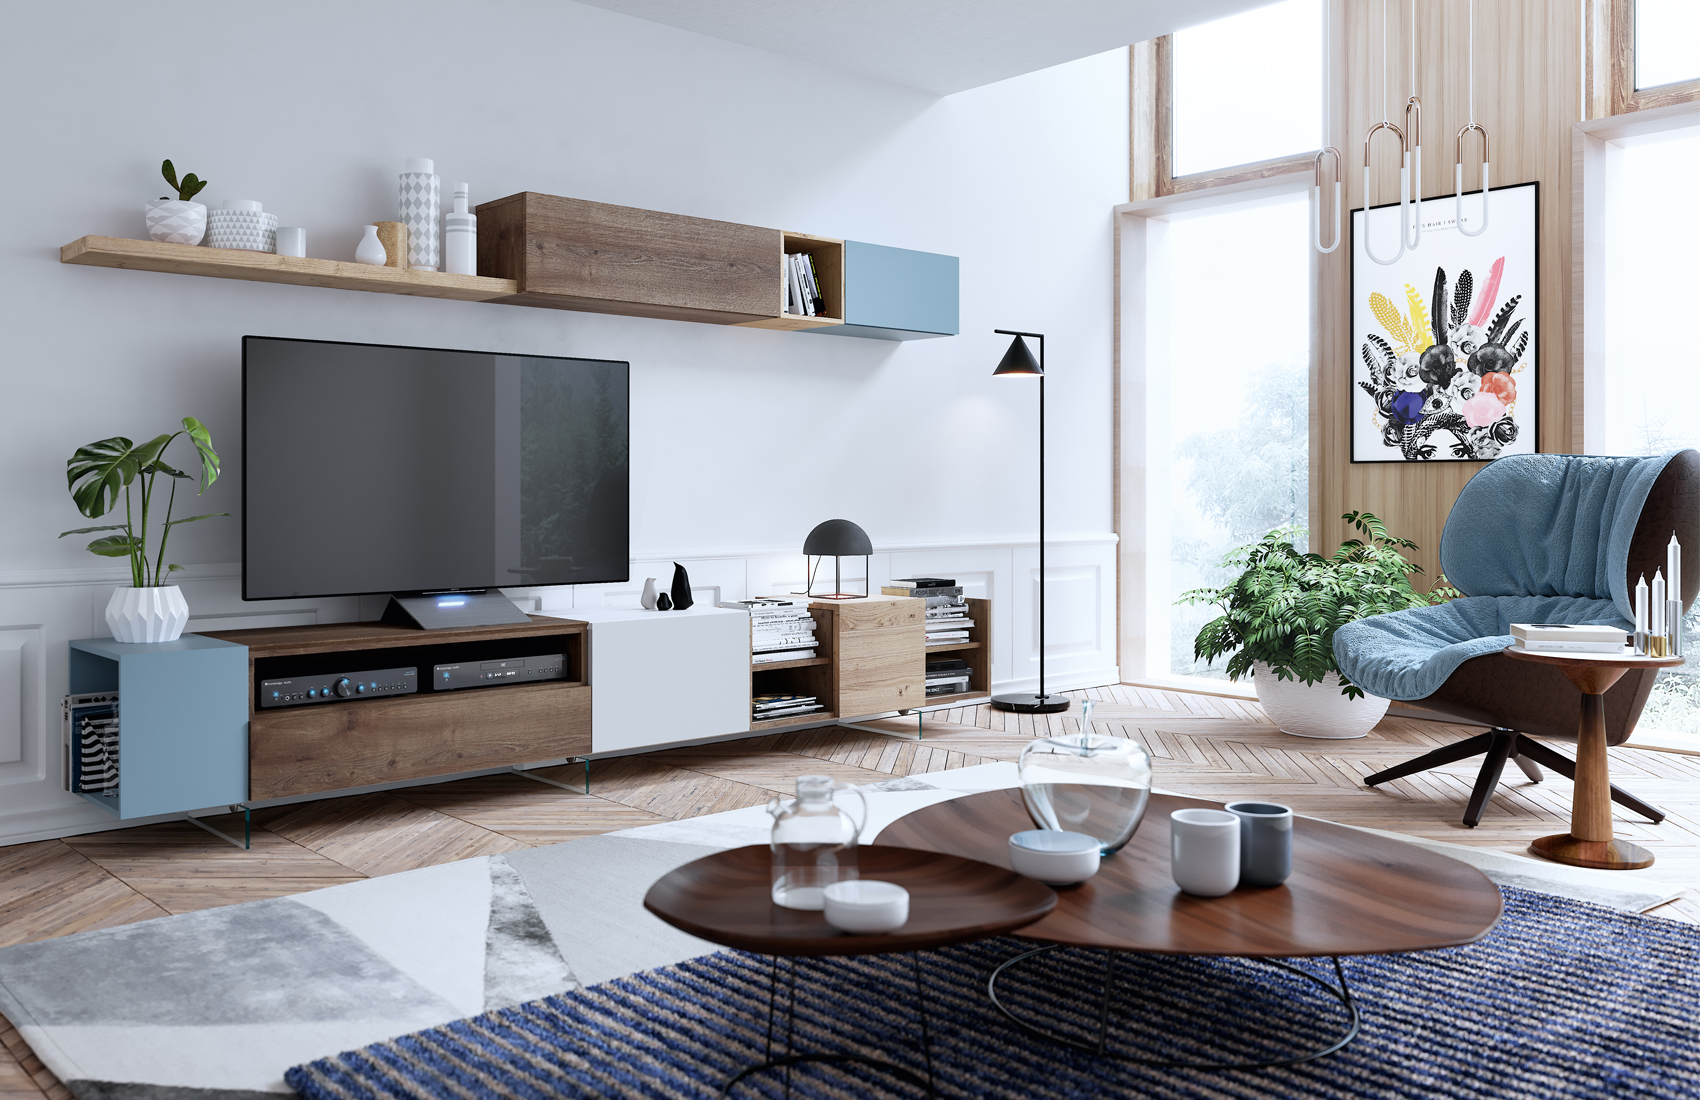 Brands MSC Modern Wall Unit, Italy Composition CK11